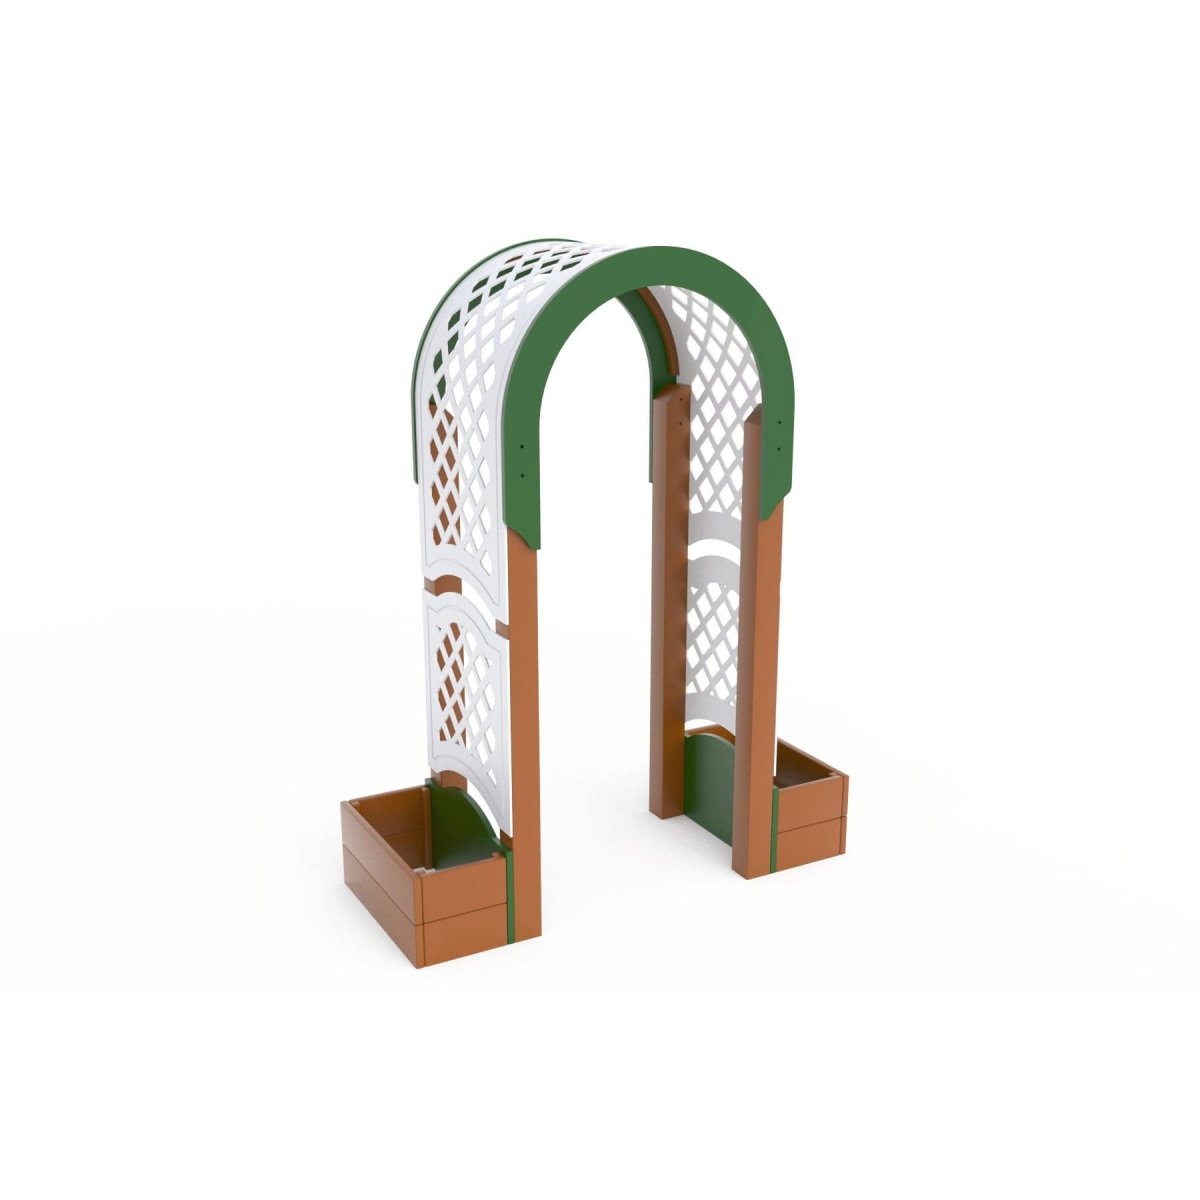 Arched Arbor with Planter Boxes - Sensory Gardens - Playtopia, Inc.